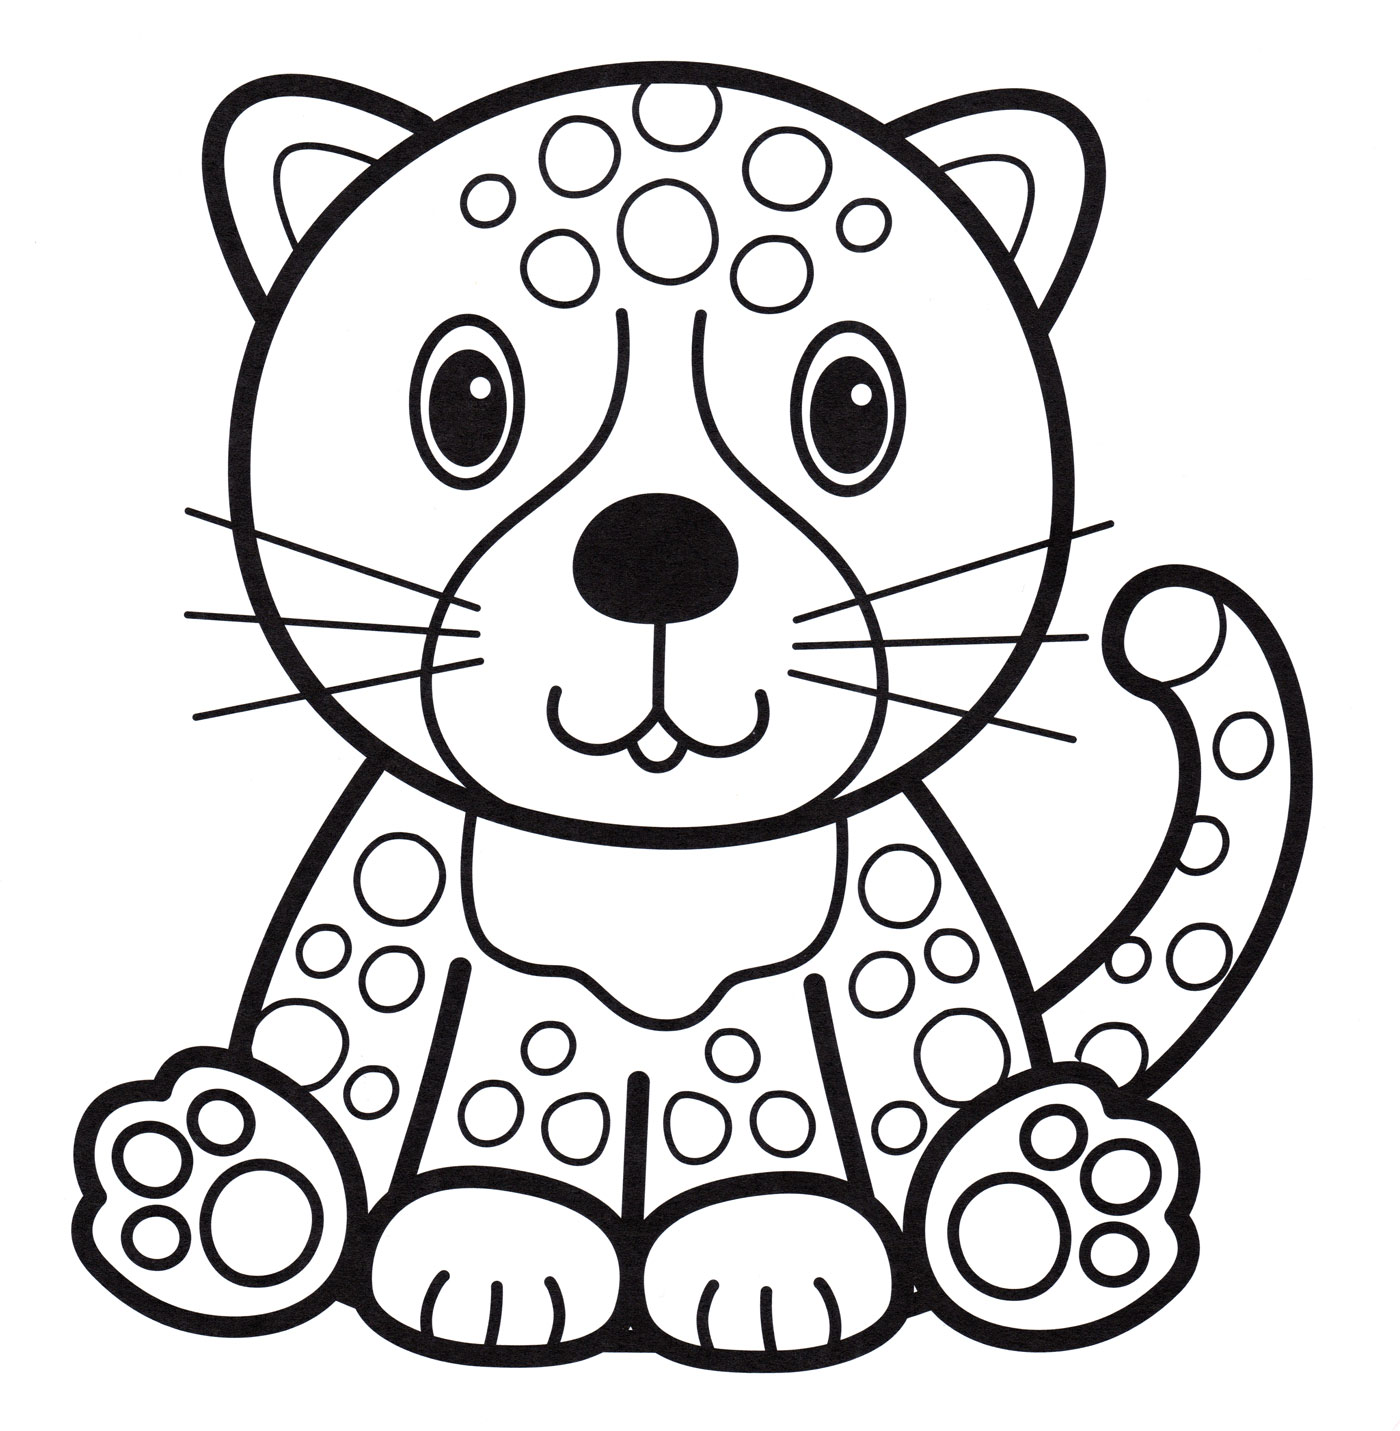 Coloring pages for fingers cat